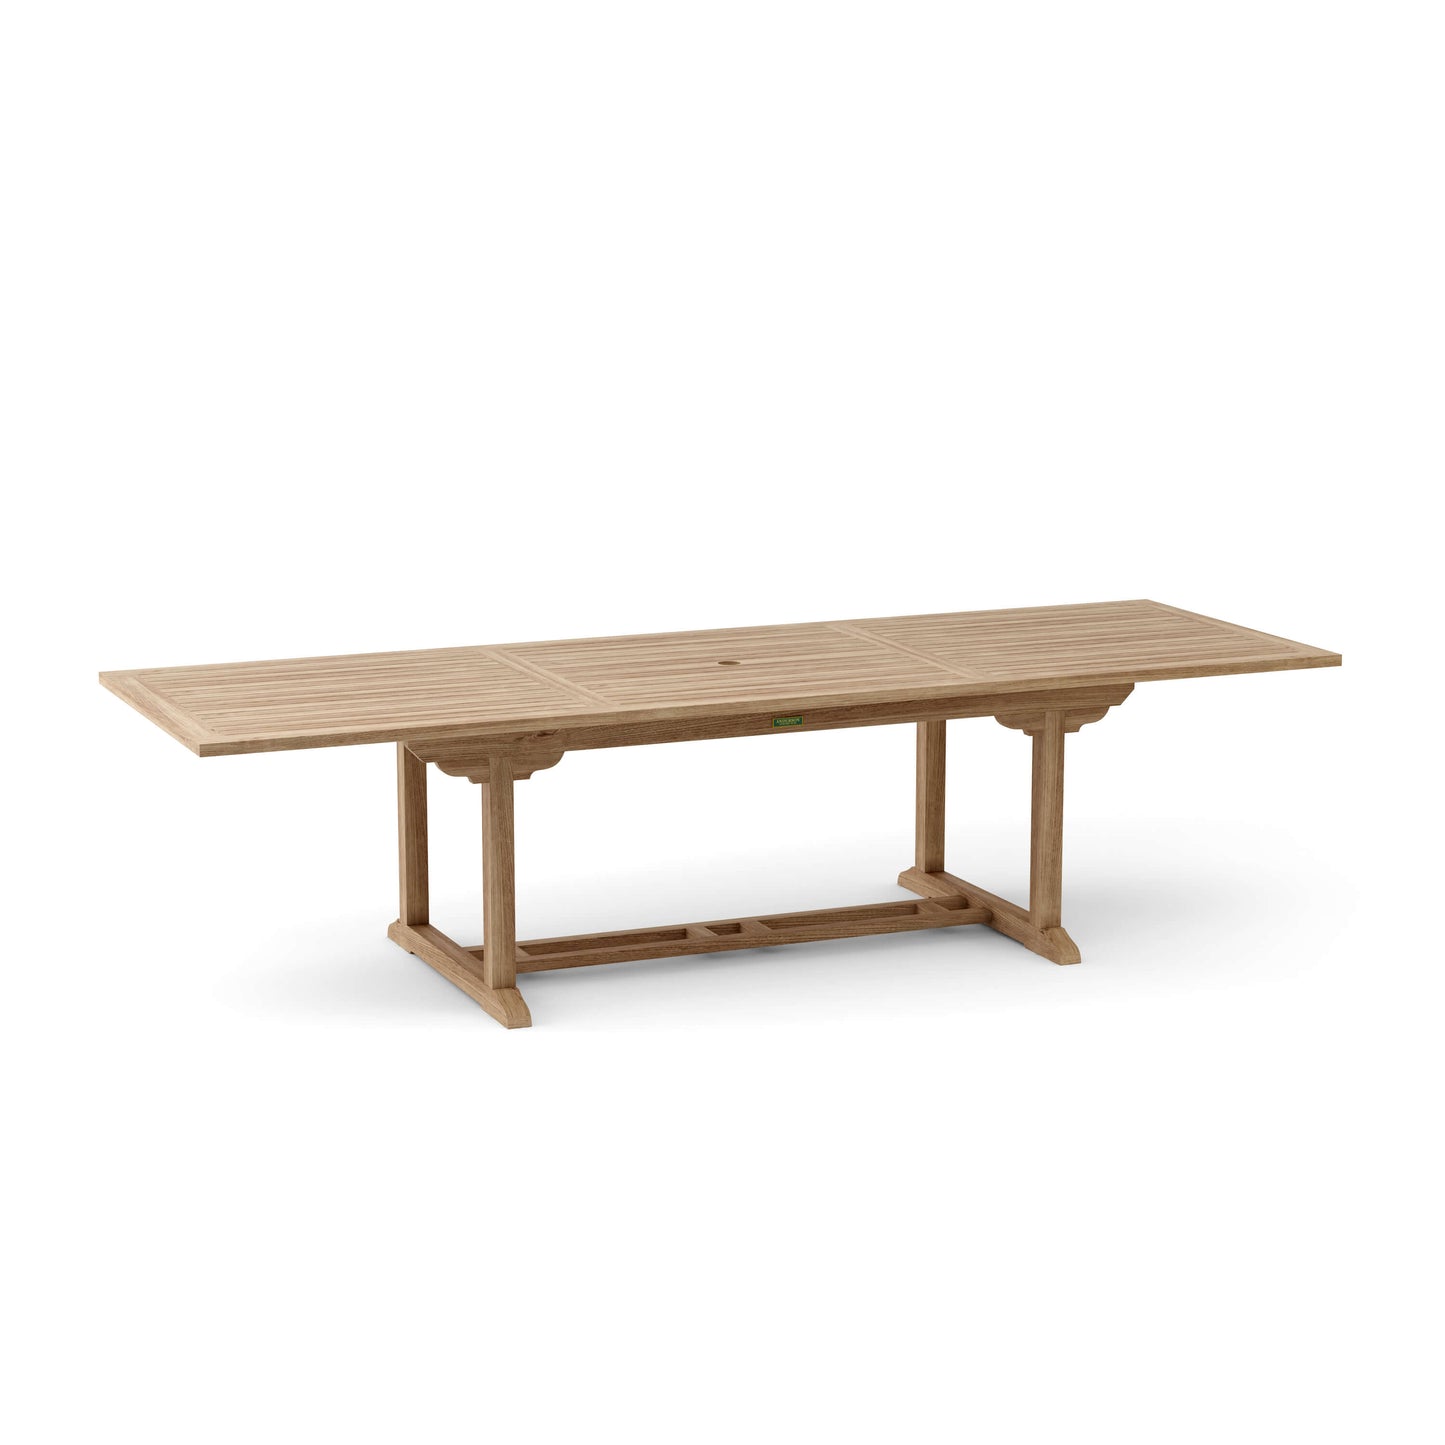 Bahama 118" Rectangular Extension Table Extension Table Anderson   